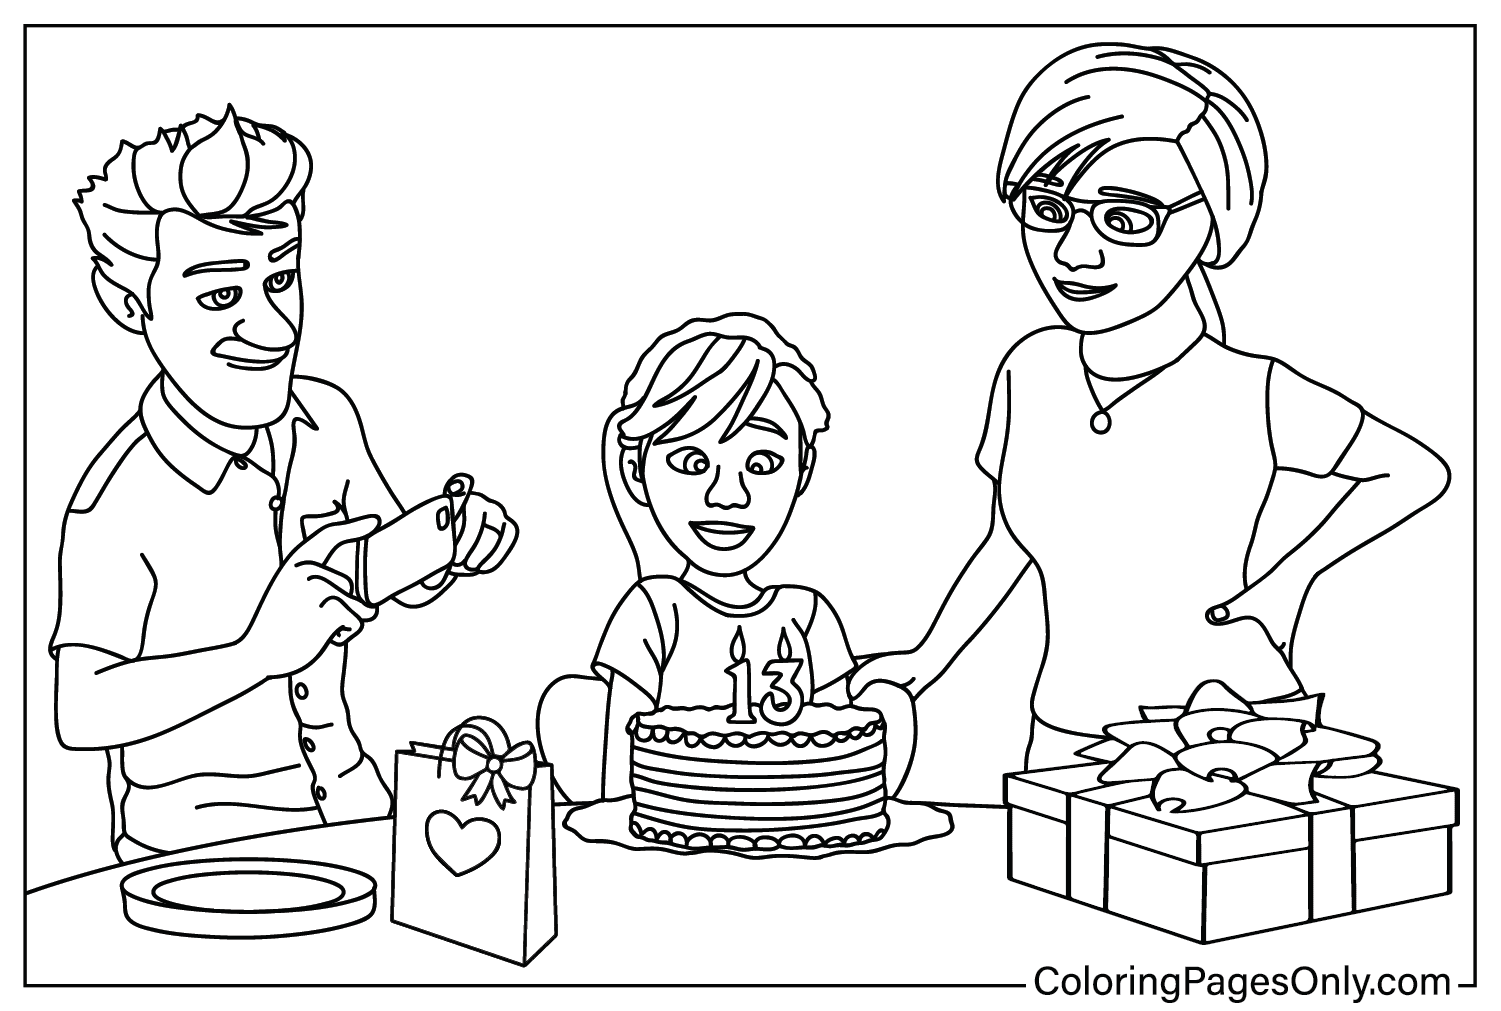 Inside Out 2 Coloring Sheet for Kids from Inside Out 2